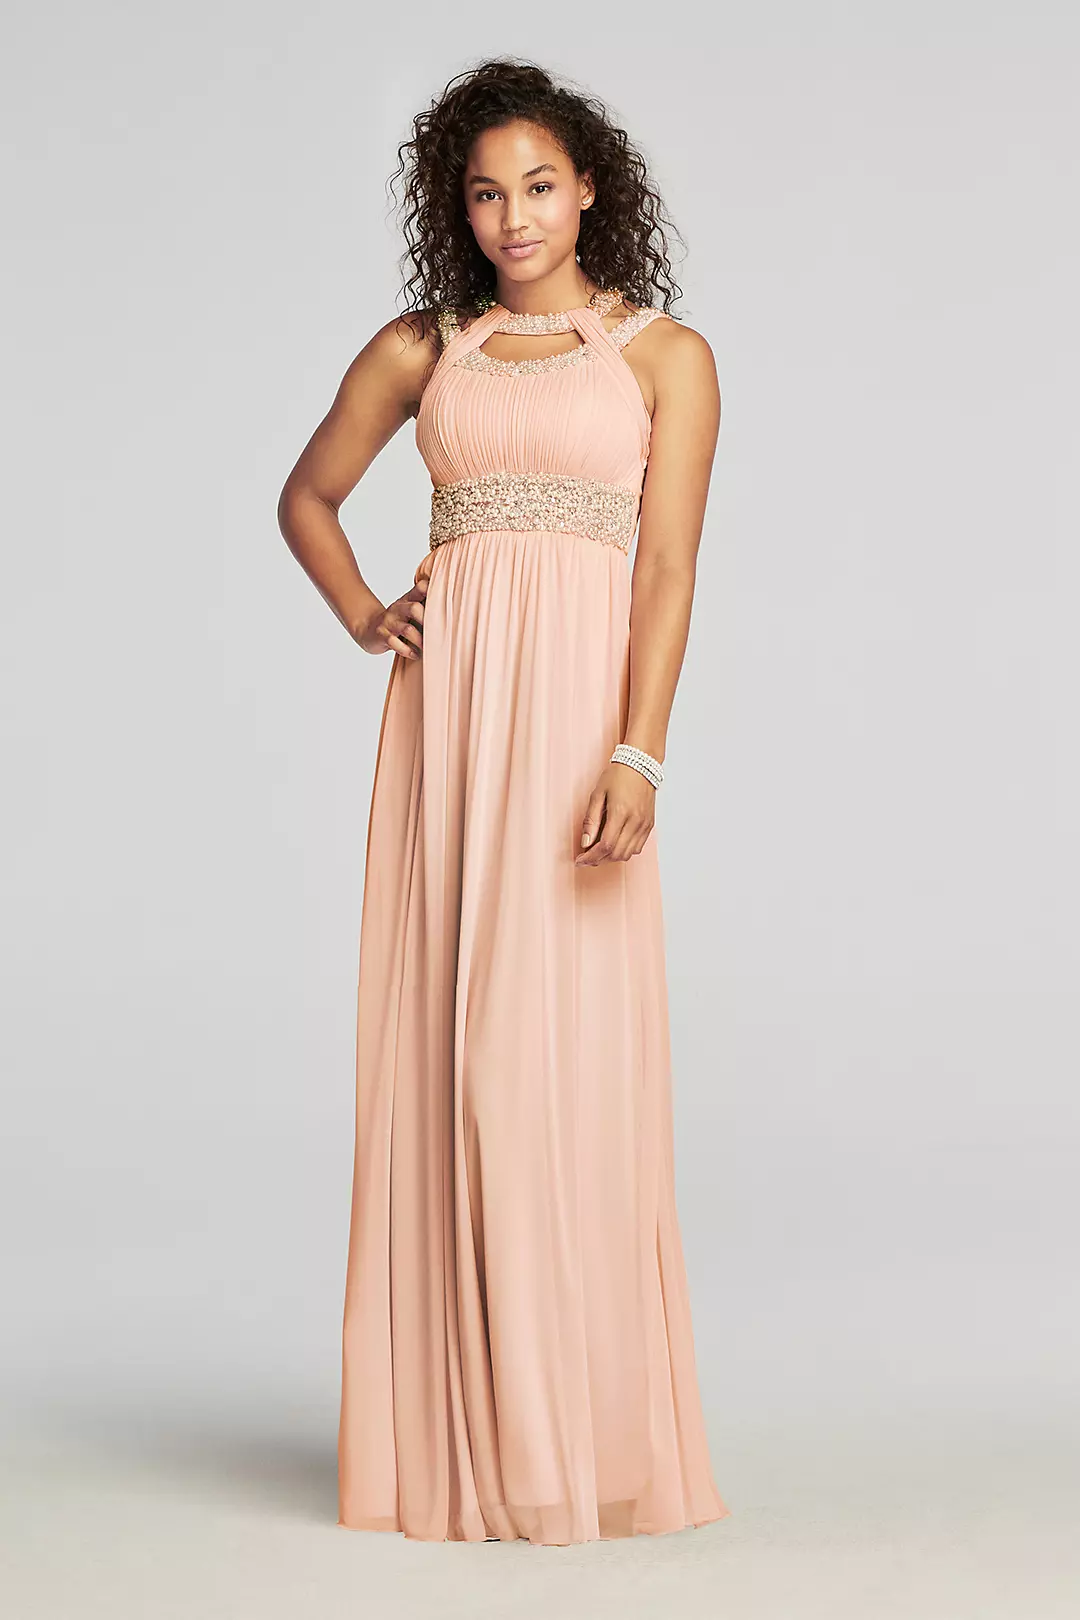 Pearl Beaded Cut Out Halter Prom Dress Image